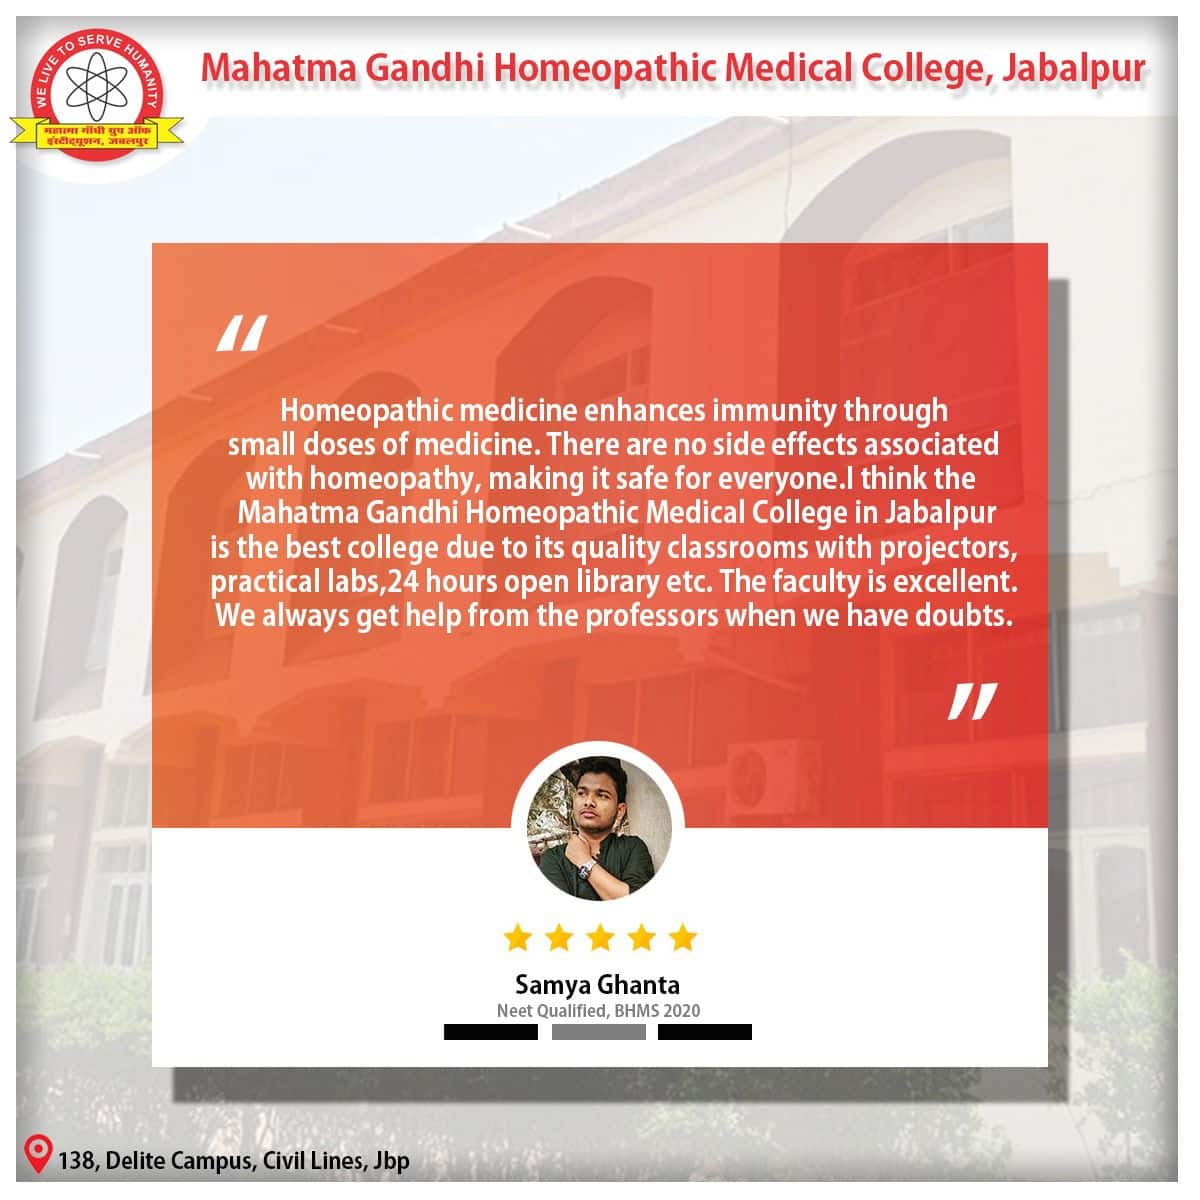 Student`s review on Mahatma Gandhi Homoeopathic Medical College.